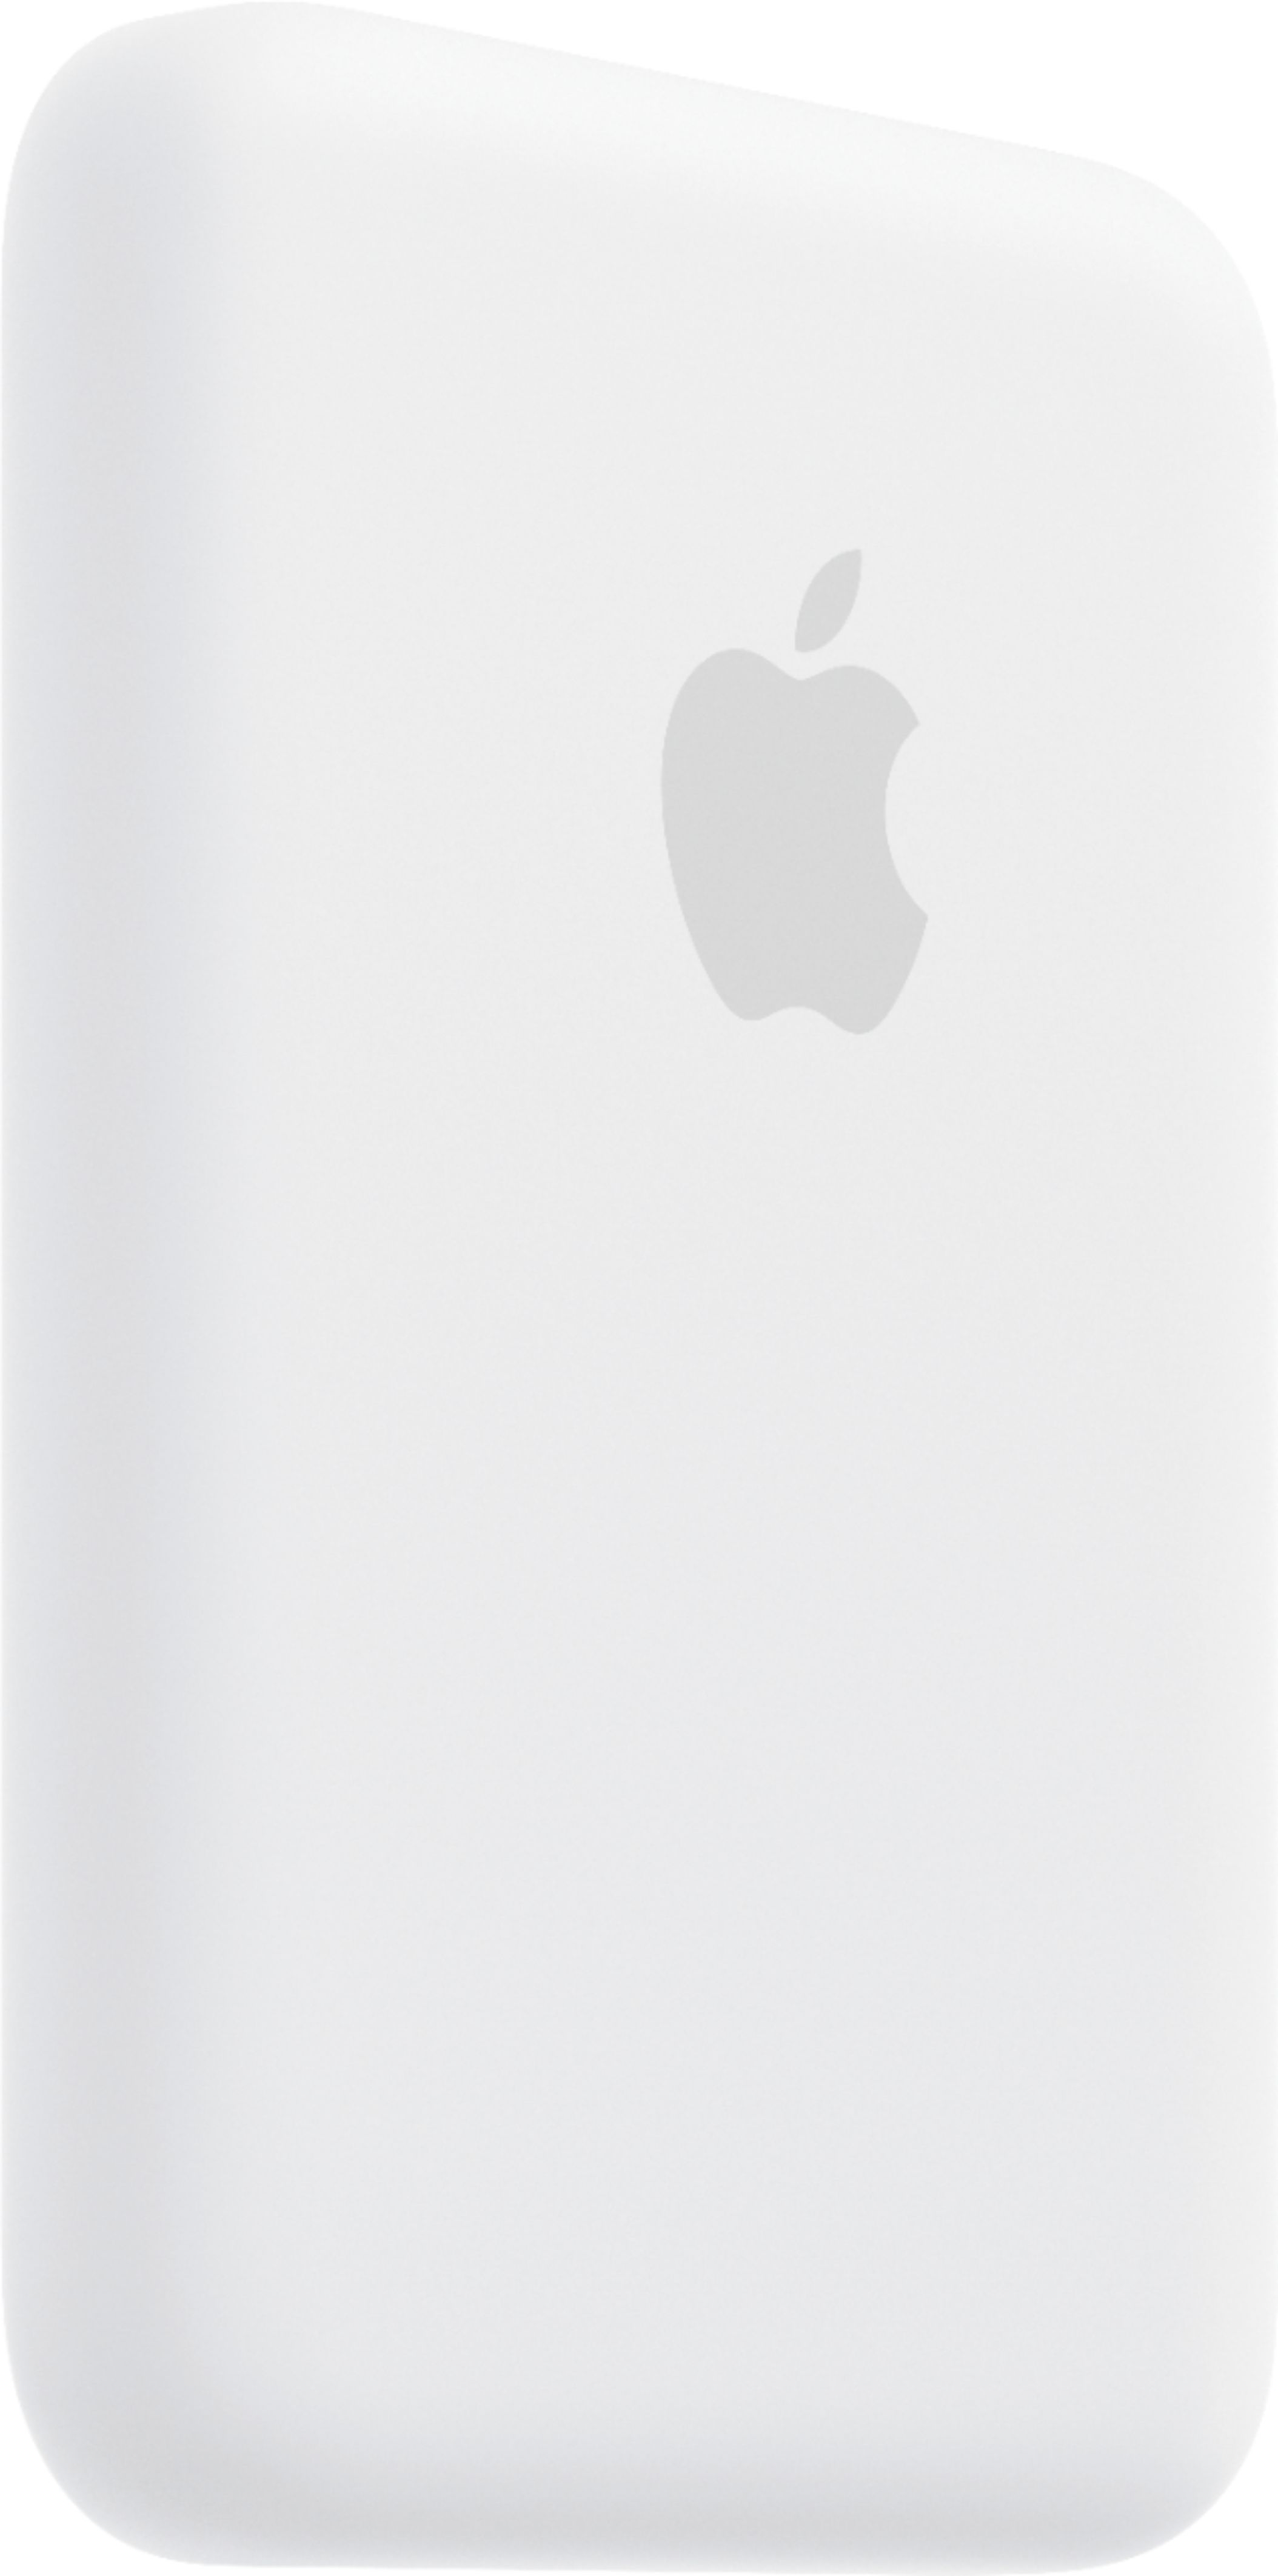 ZEERA MagSafe Power Bank : The Best MagSafe Battery Pack for iPhone 13 &  iPhone 12 series